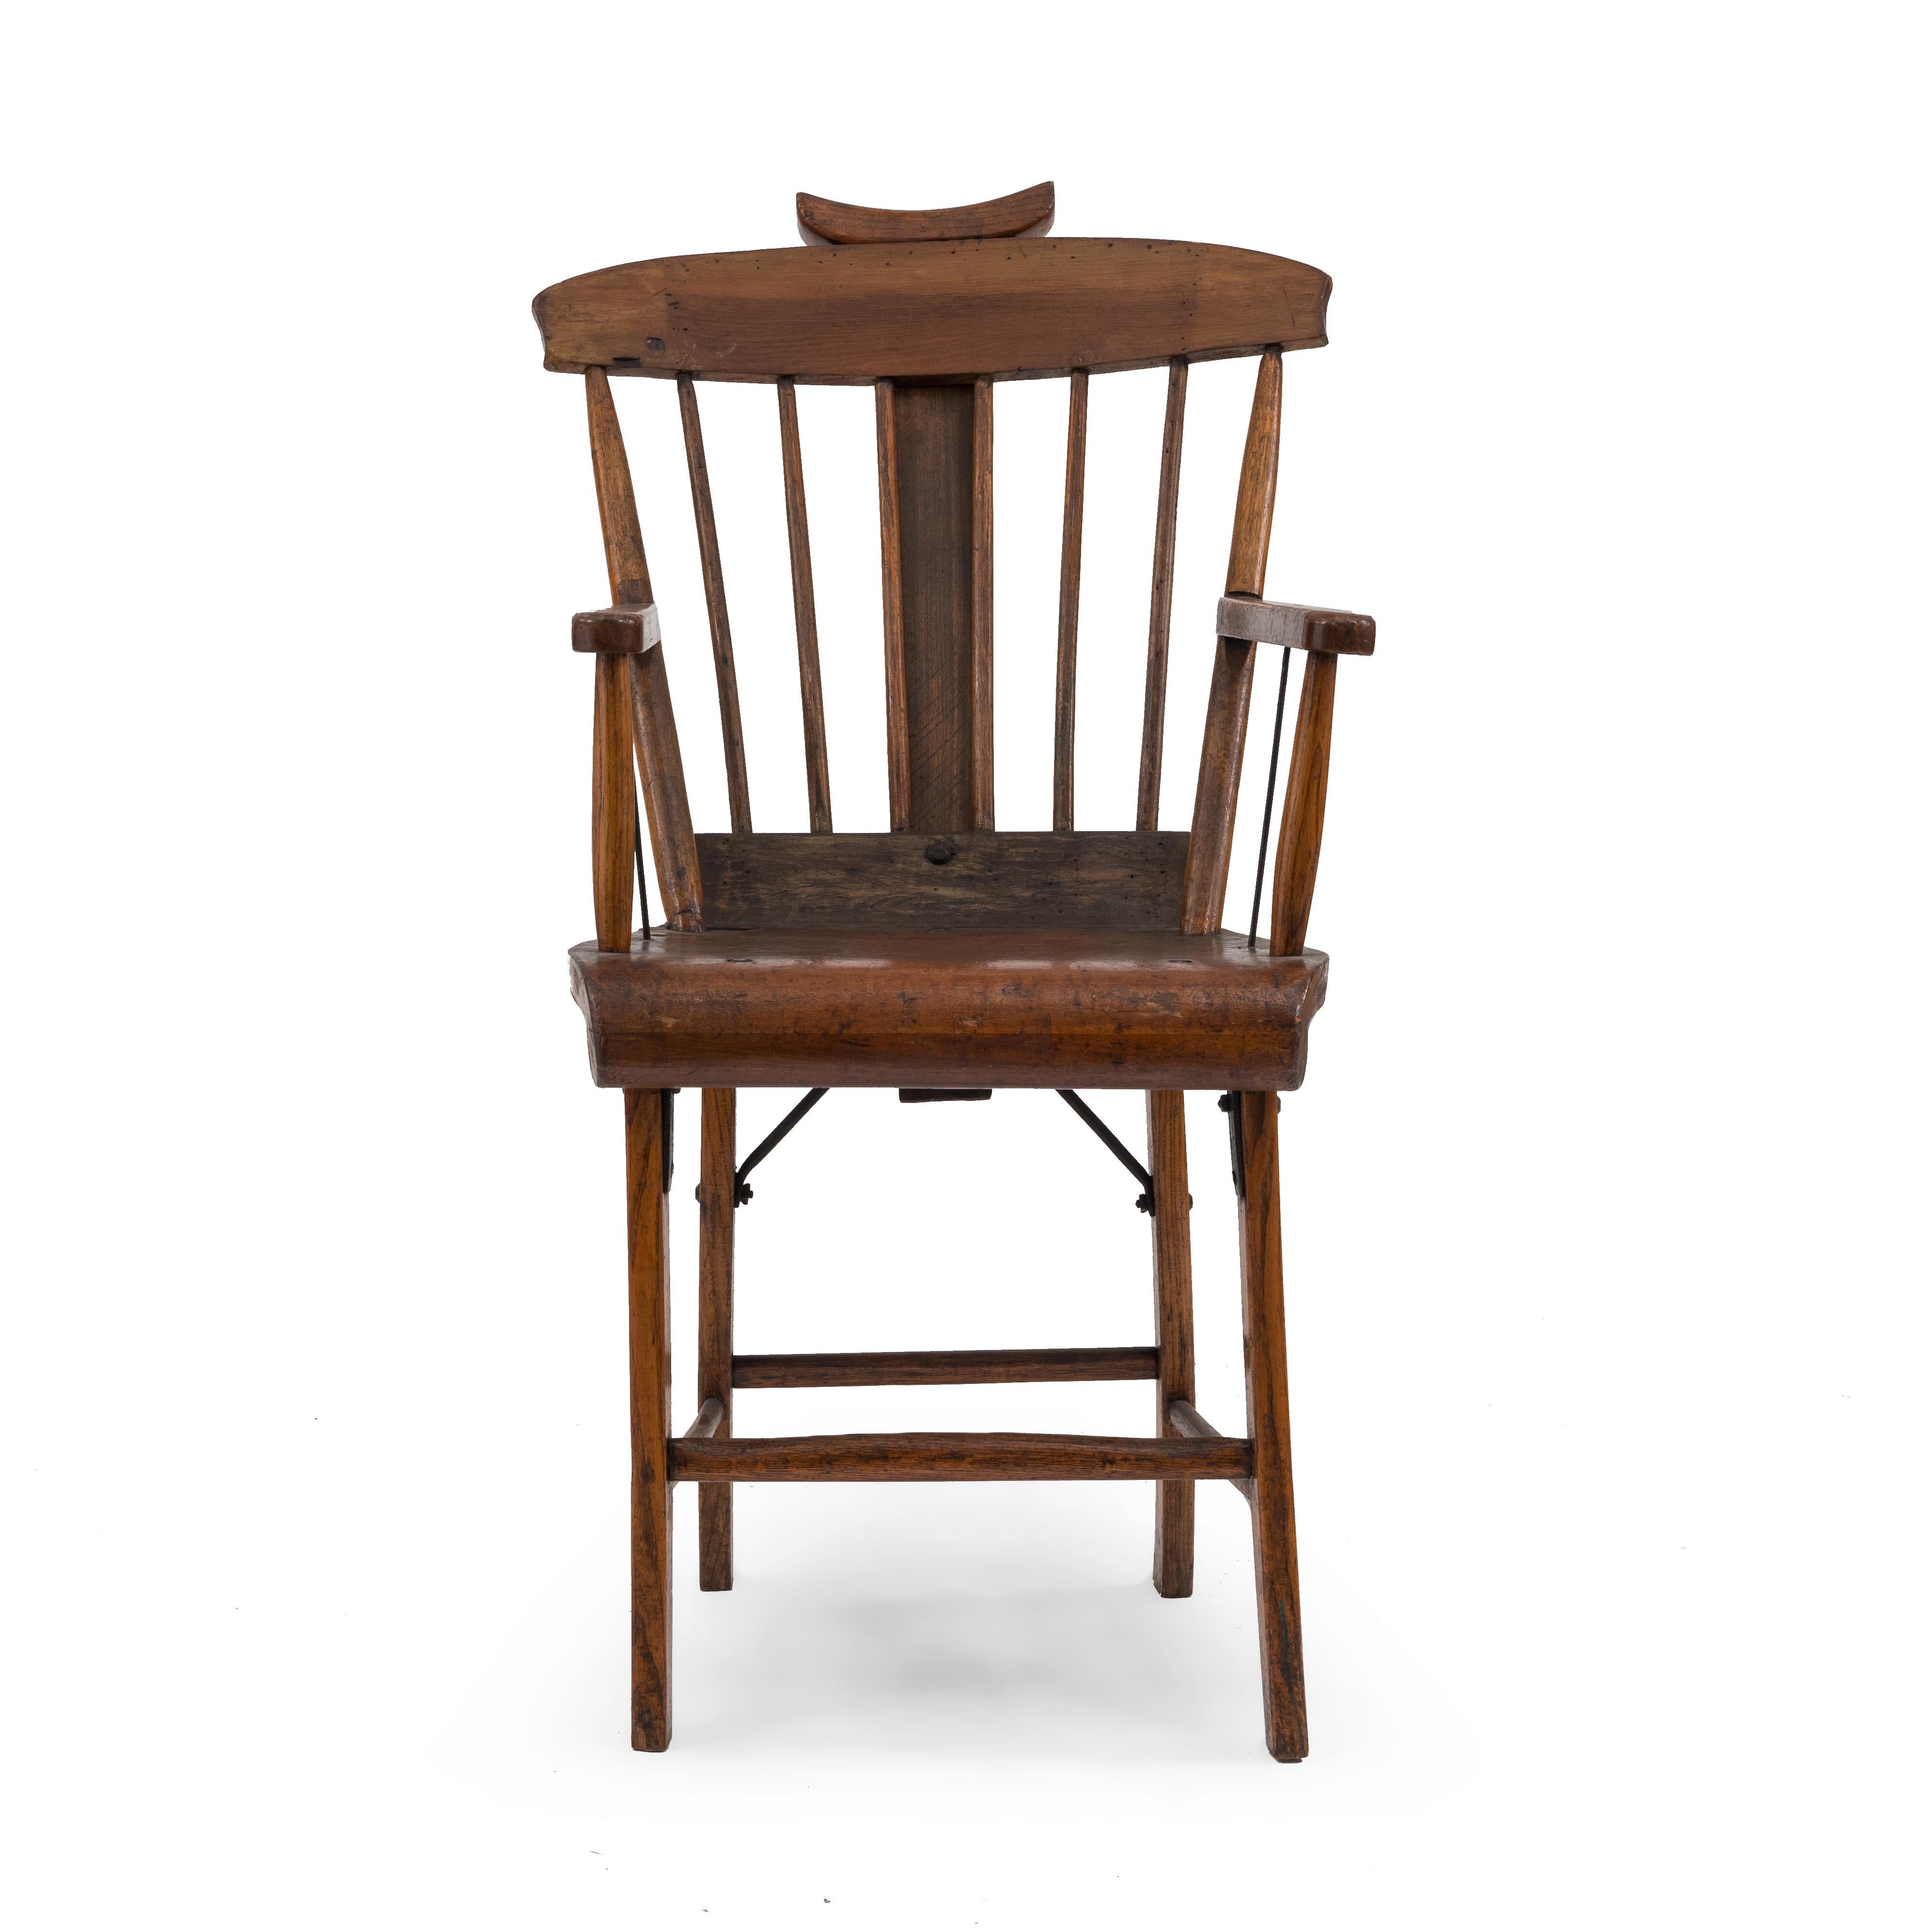 American Country (19th century) stained pine armchair with spindle back and adjustable headrest.